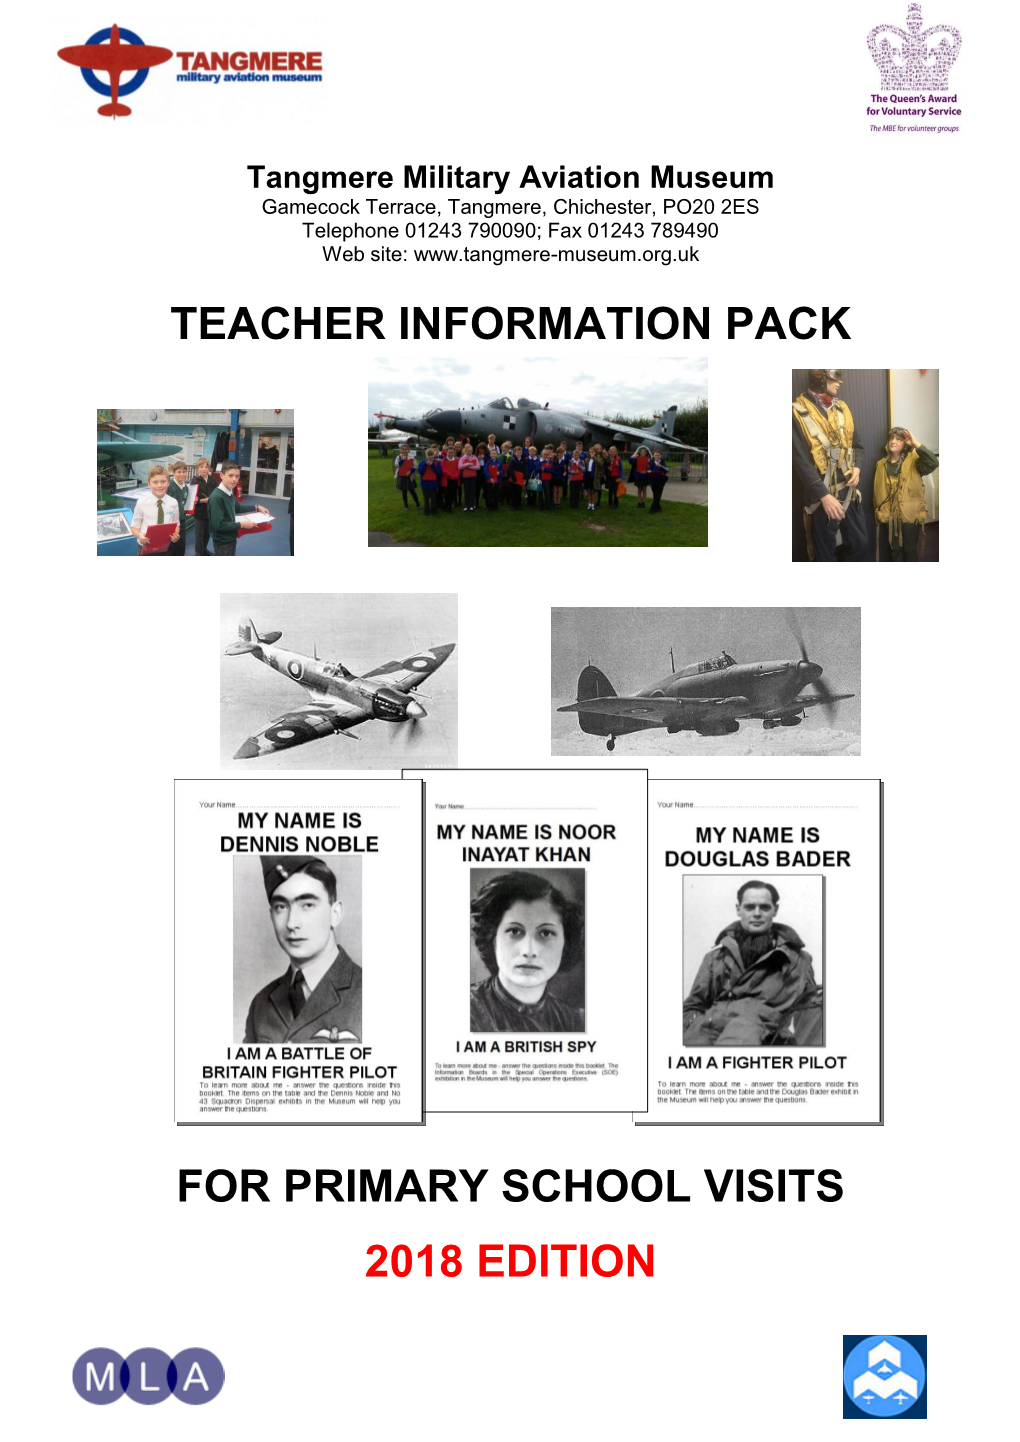 Primary School Visits to Tangmere Military Aviation